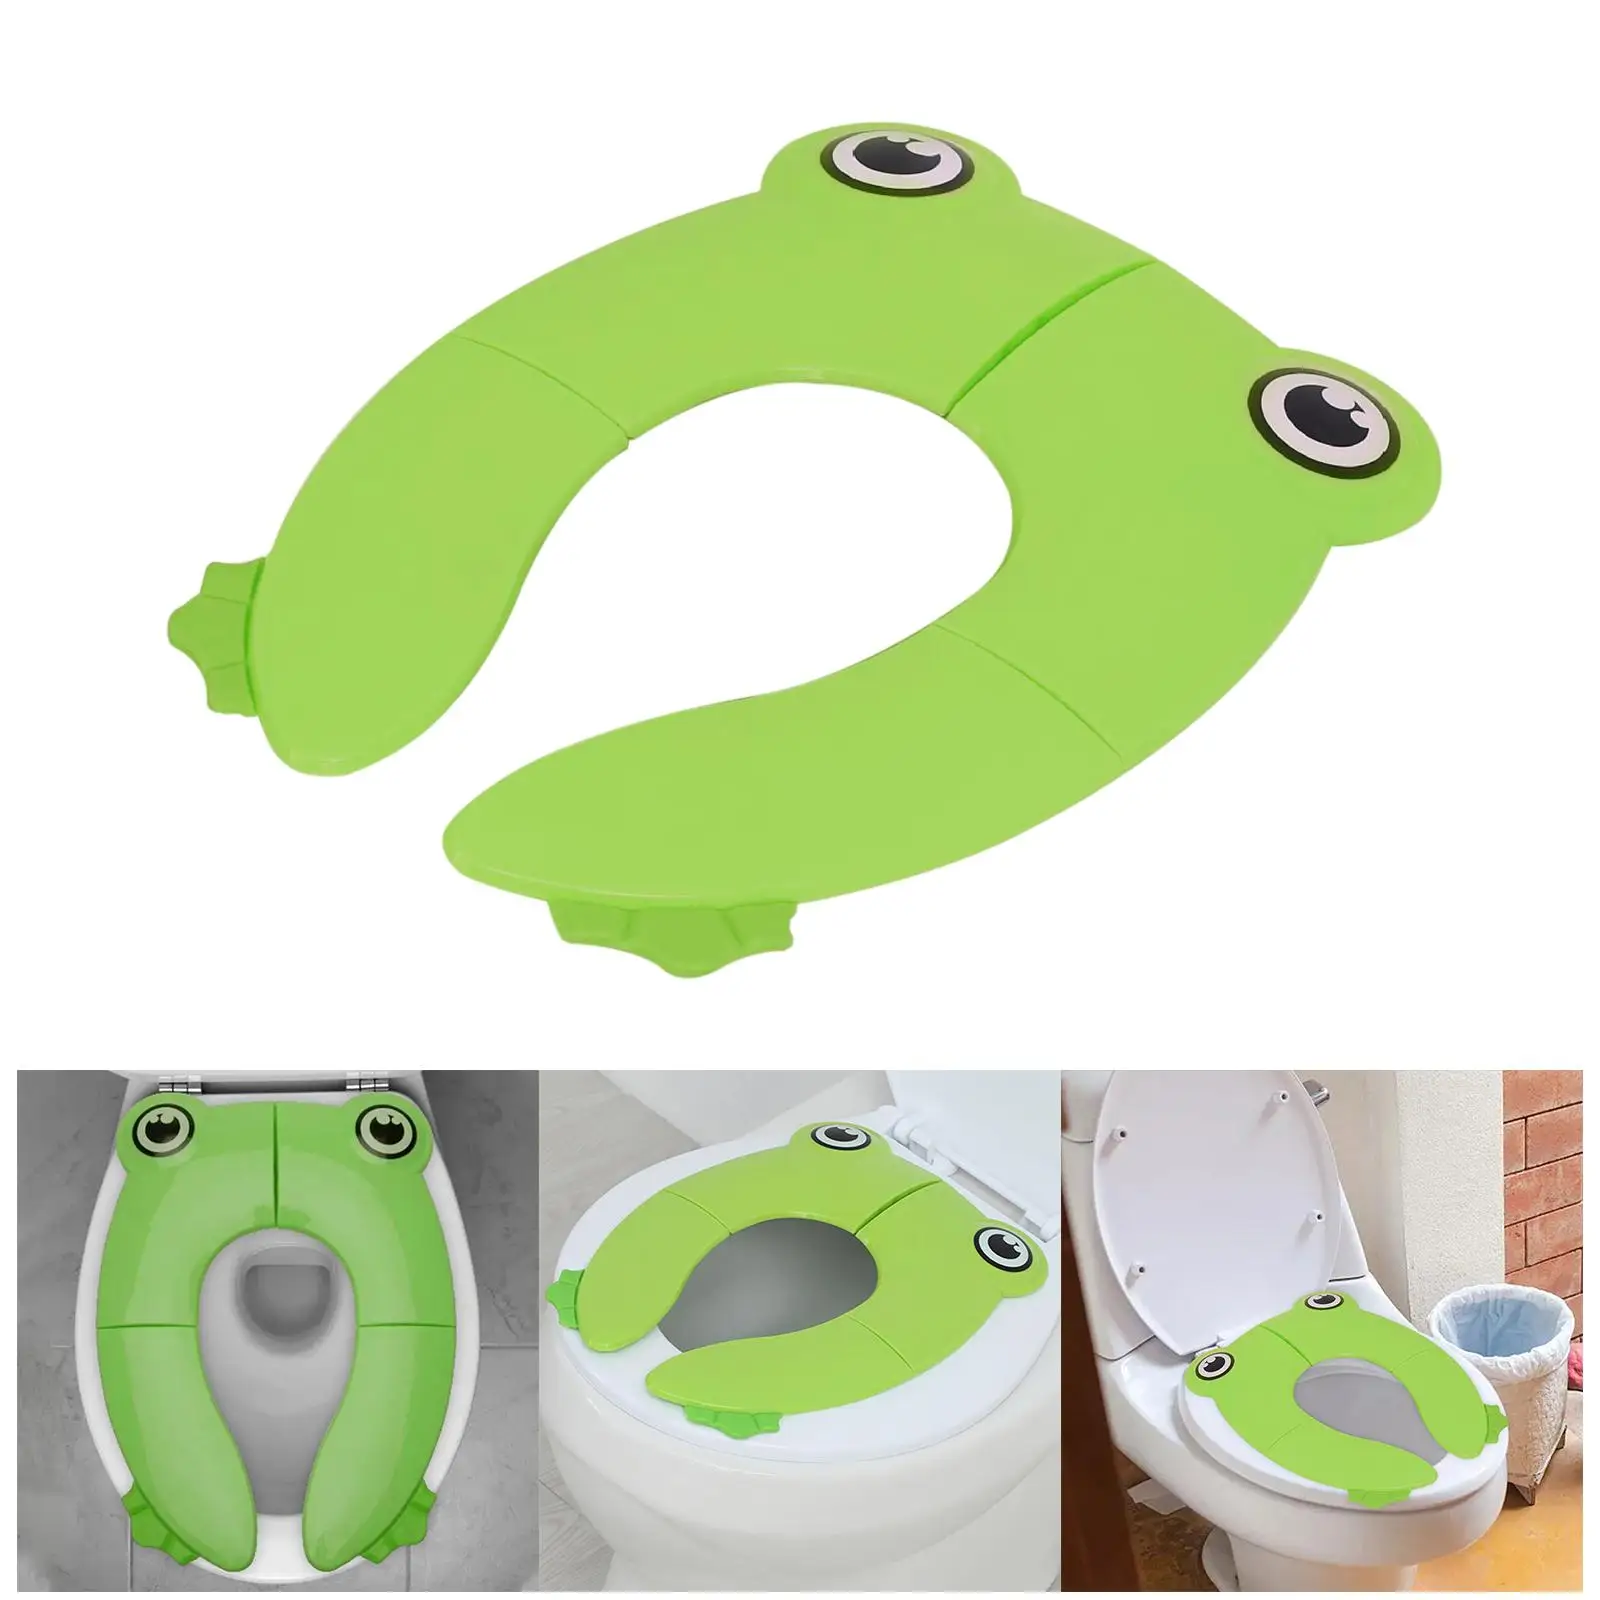 Portable Toilet Seat Pad Comfortable Folding for Camping Home Use Girls Boys